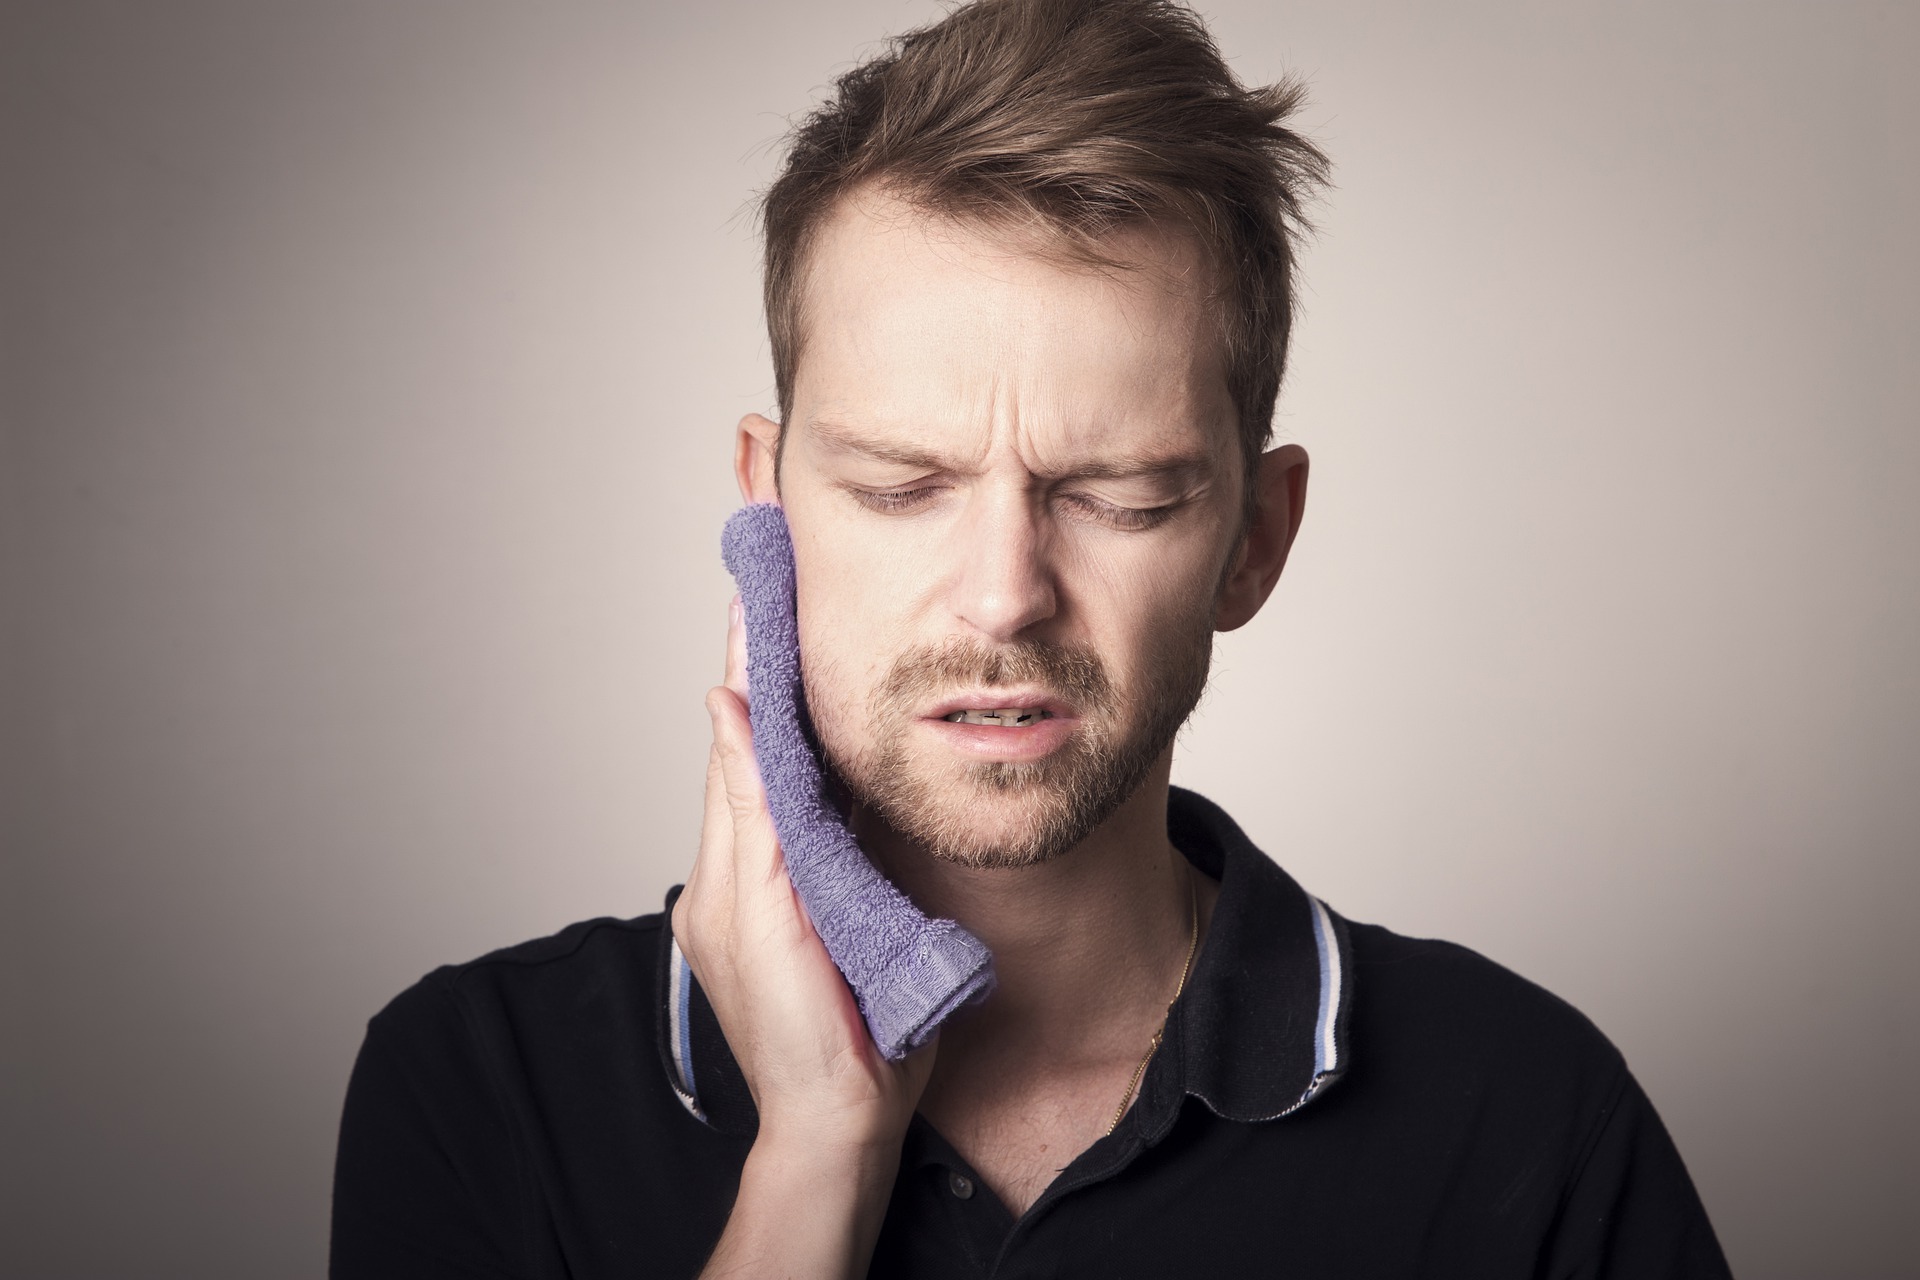 Signs That You Have A Dental Emergency